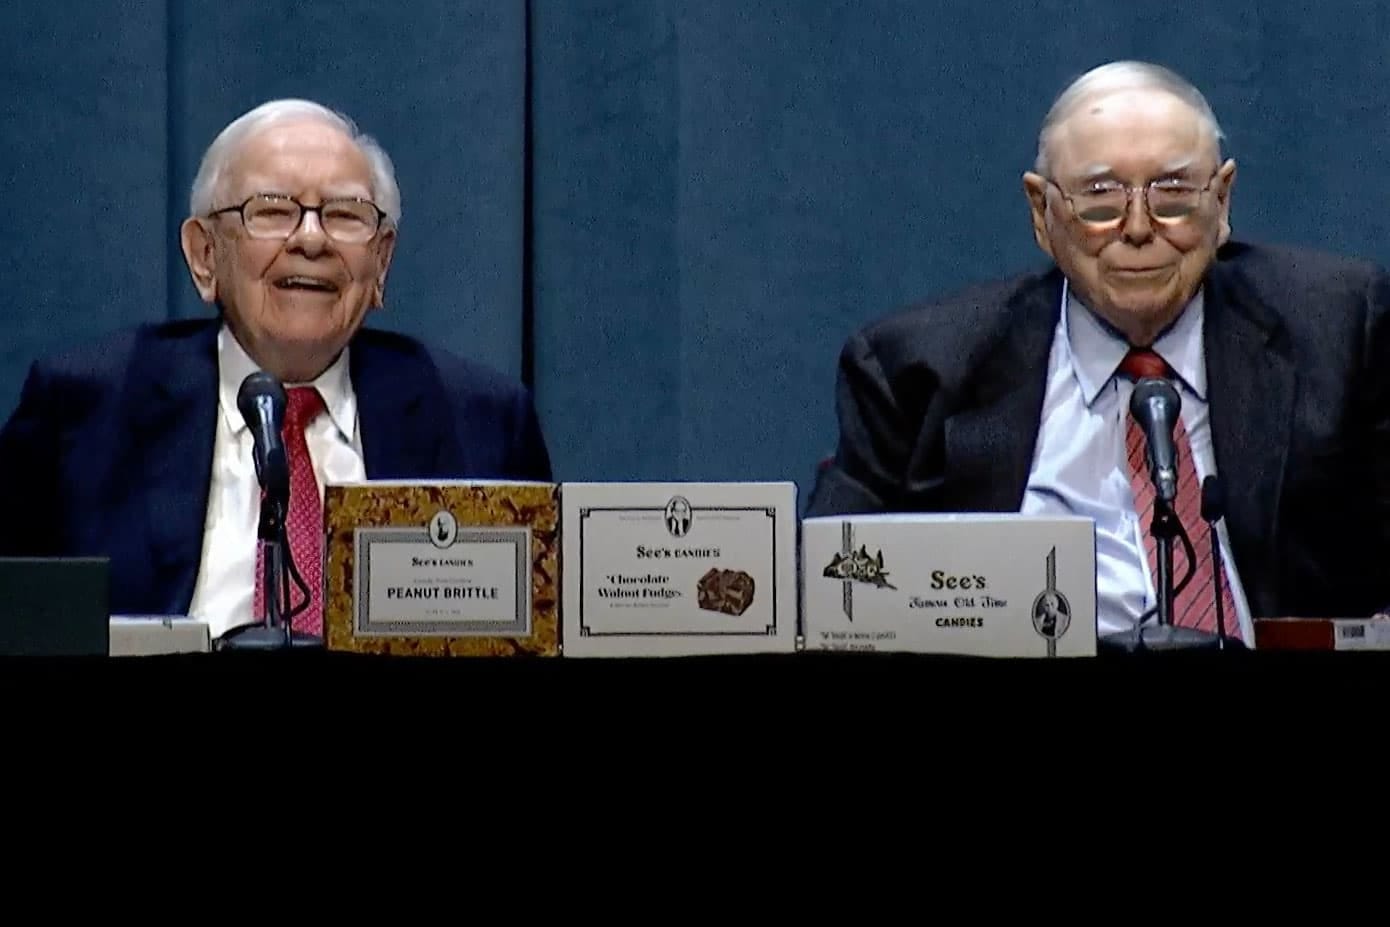 Berkshire's annual meeting: What to expect from Buffett and Munger